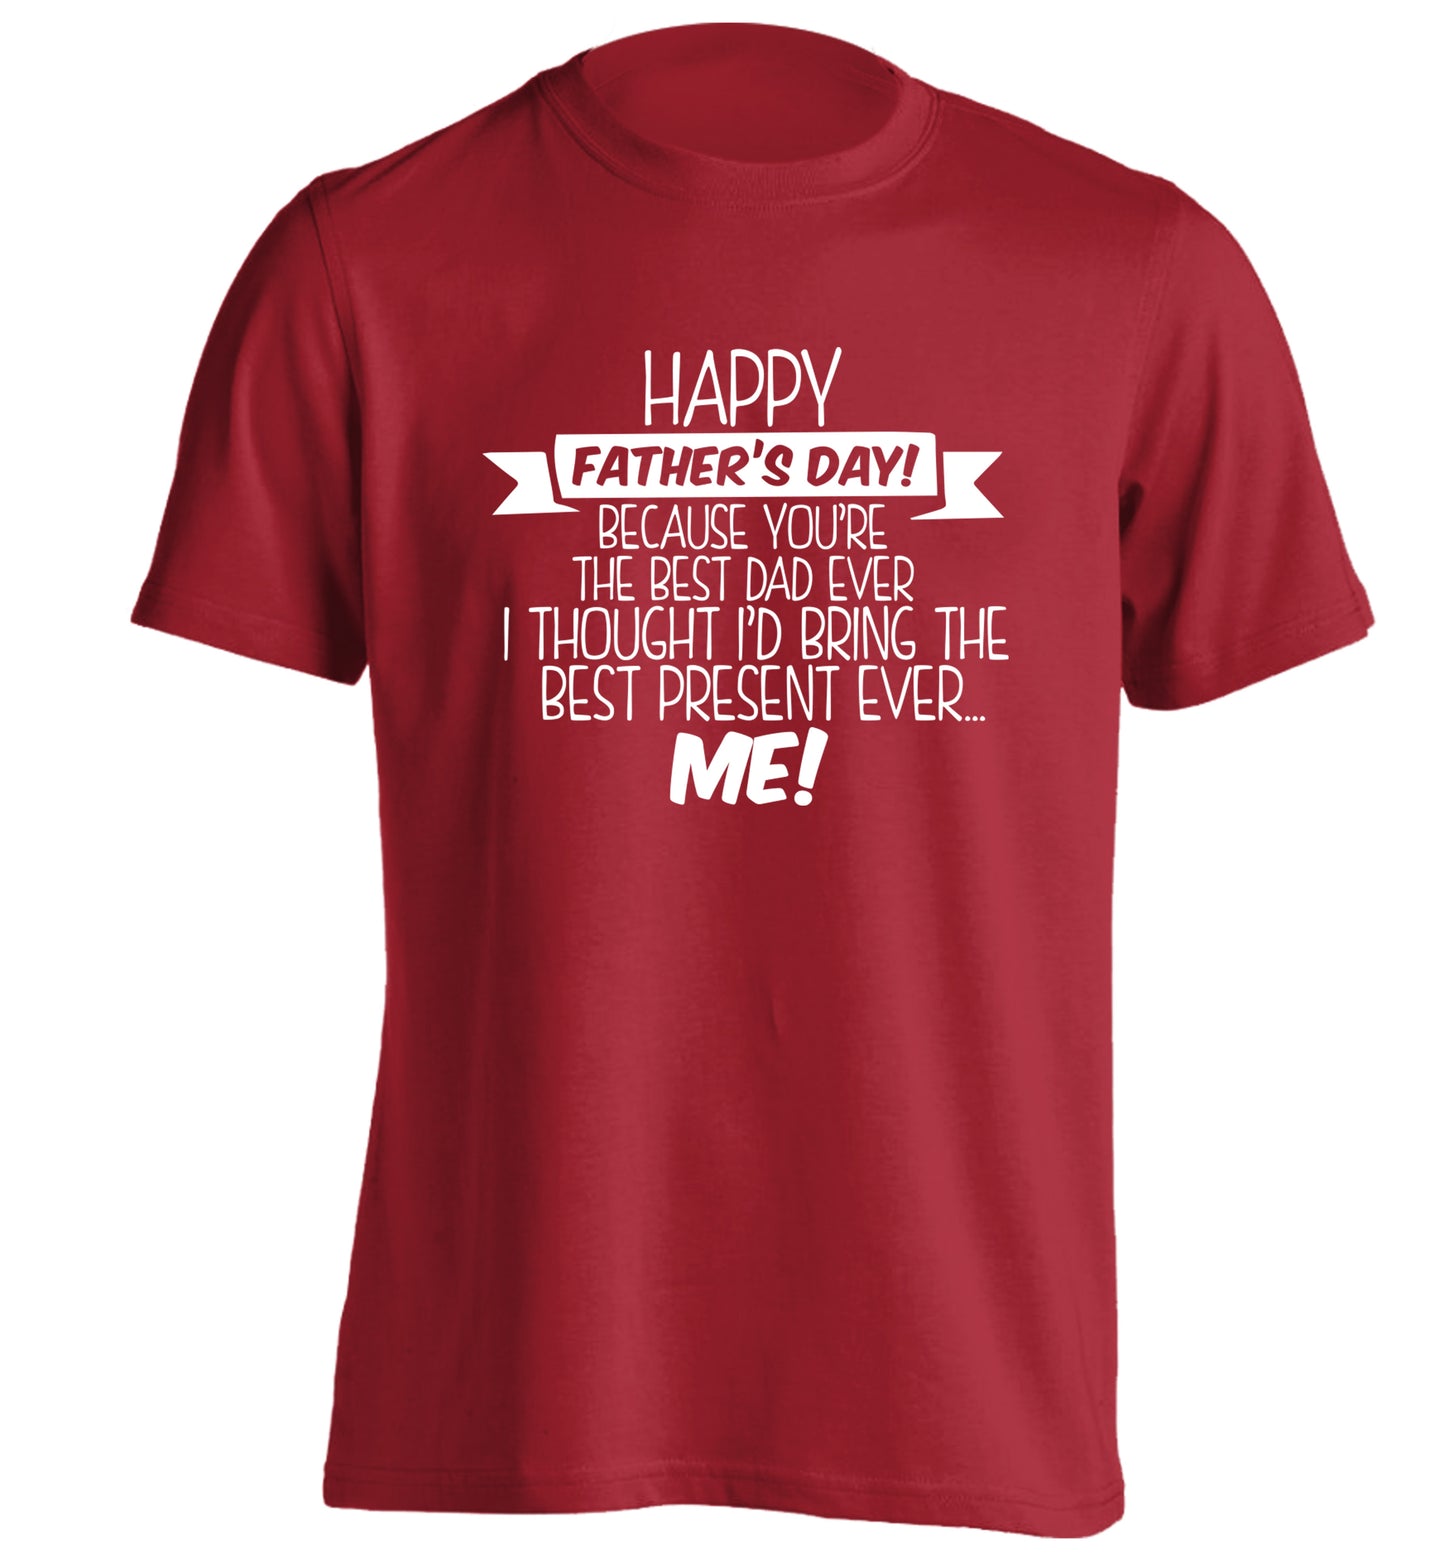 Happy Father's day, because you're the best dad ever I thought I'd bring the best present ever...me! adults unisex red Tshirt 2XL